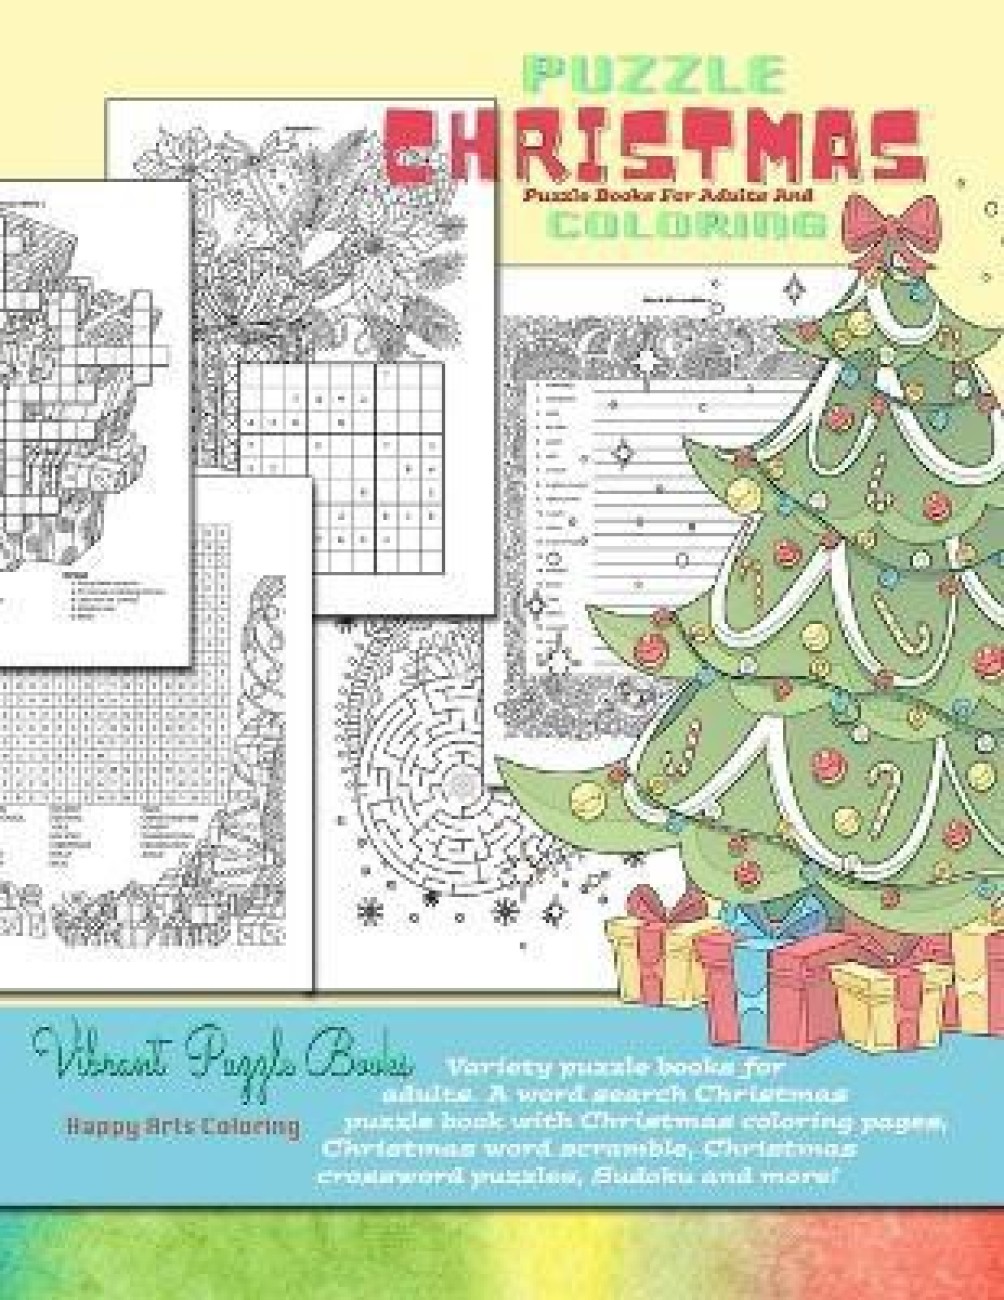 Christmas puzzle books for adults and coloring variety puzzle books for adults a word search christmas puzzle book with christmas coloring pages christmas word scramble christmas crossword puzzles sudoku and more buy